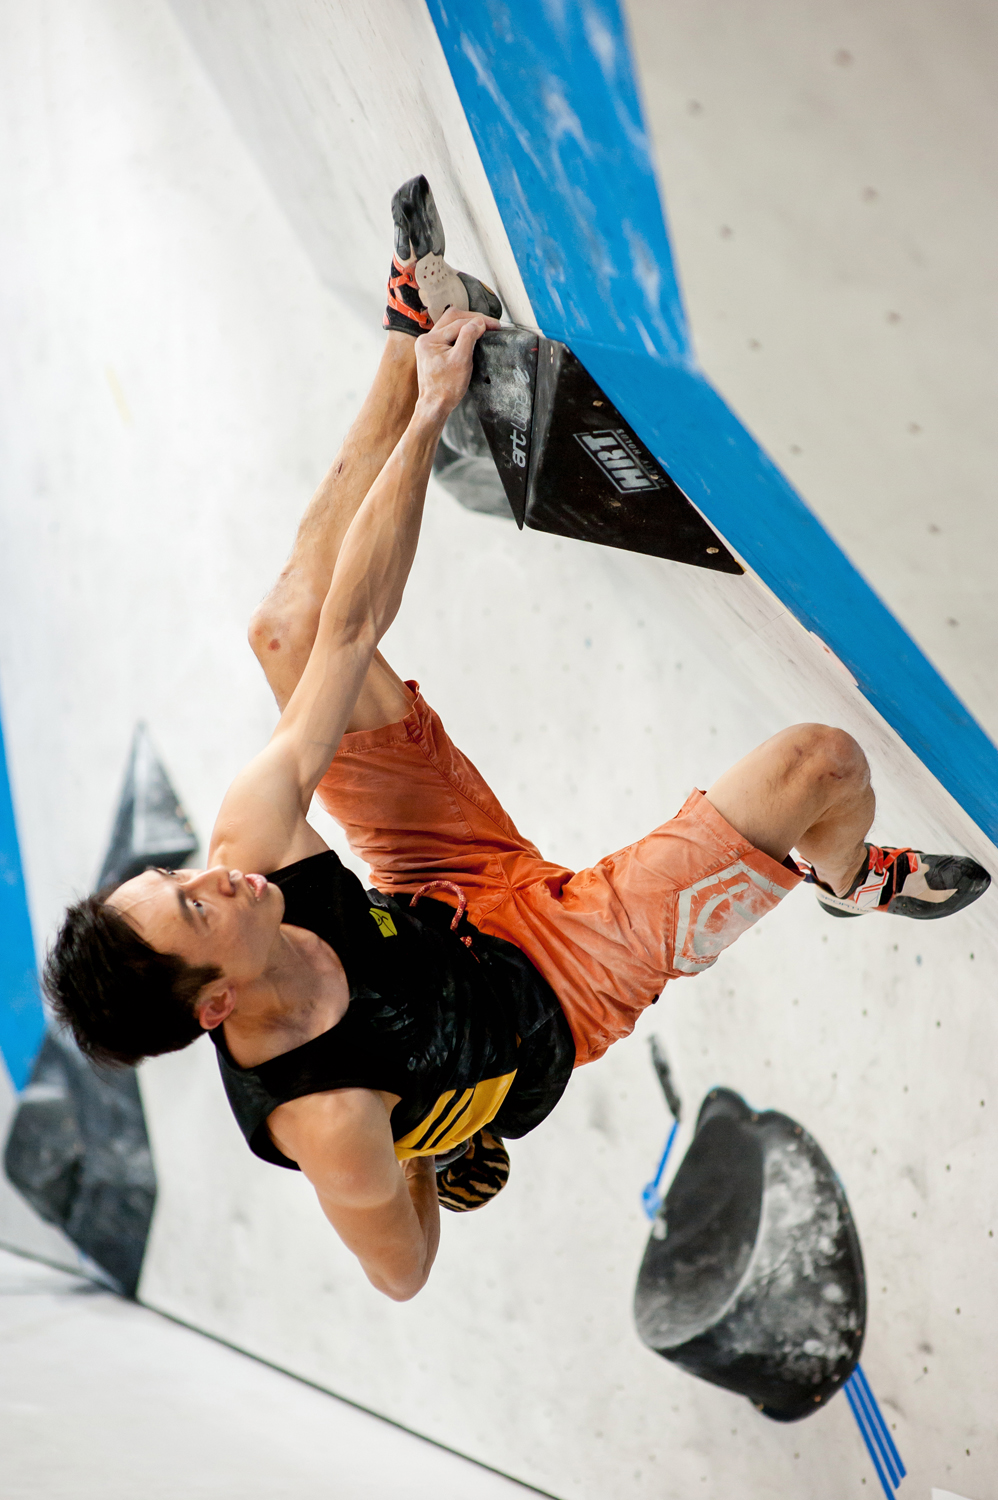 Climbing Rocks Professional Climbing Photography Competition Open Bouldering Championships 2019 (19)